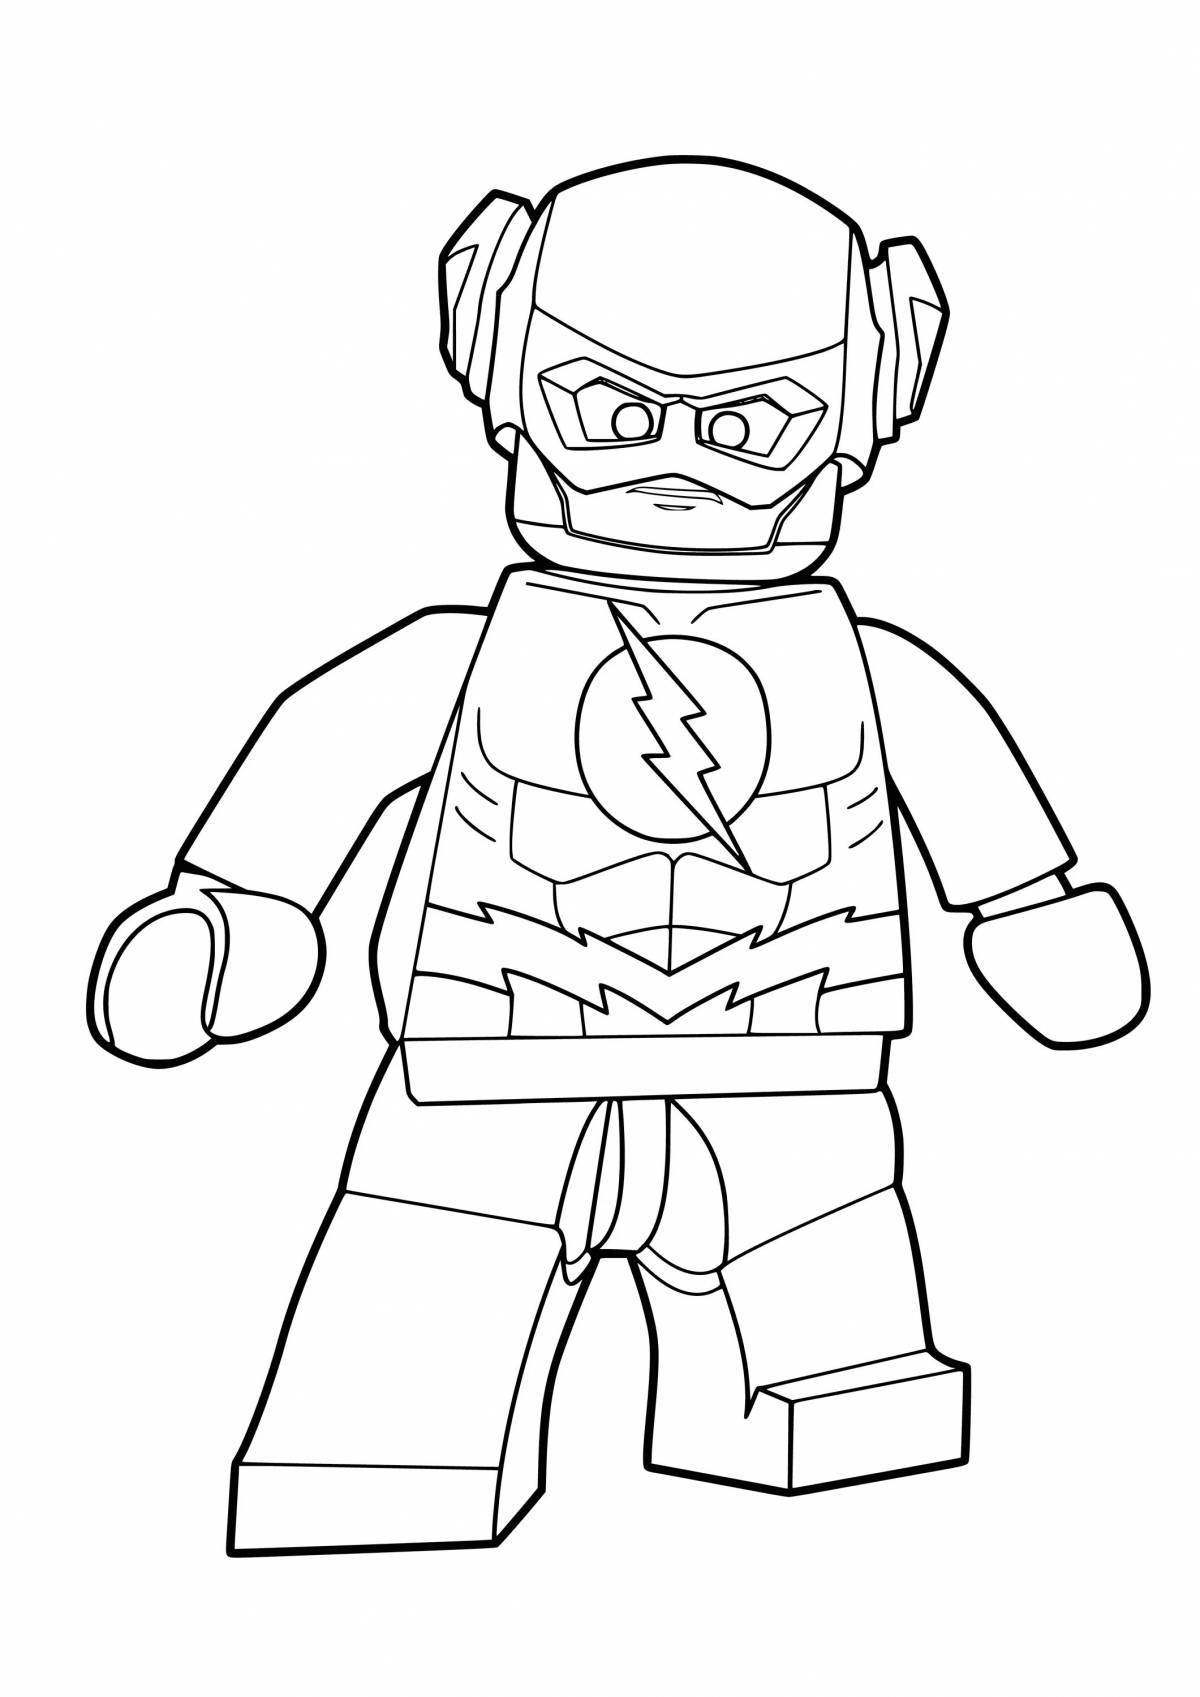 Exciting lego heroes coloring book